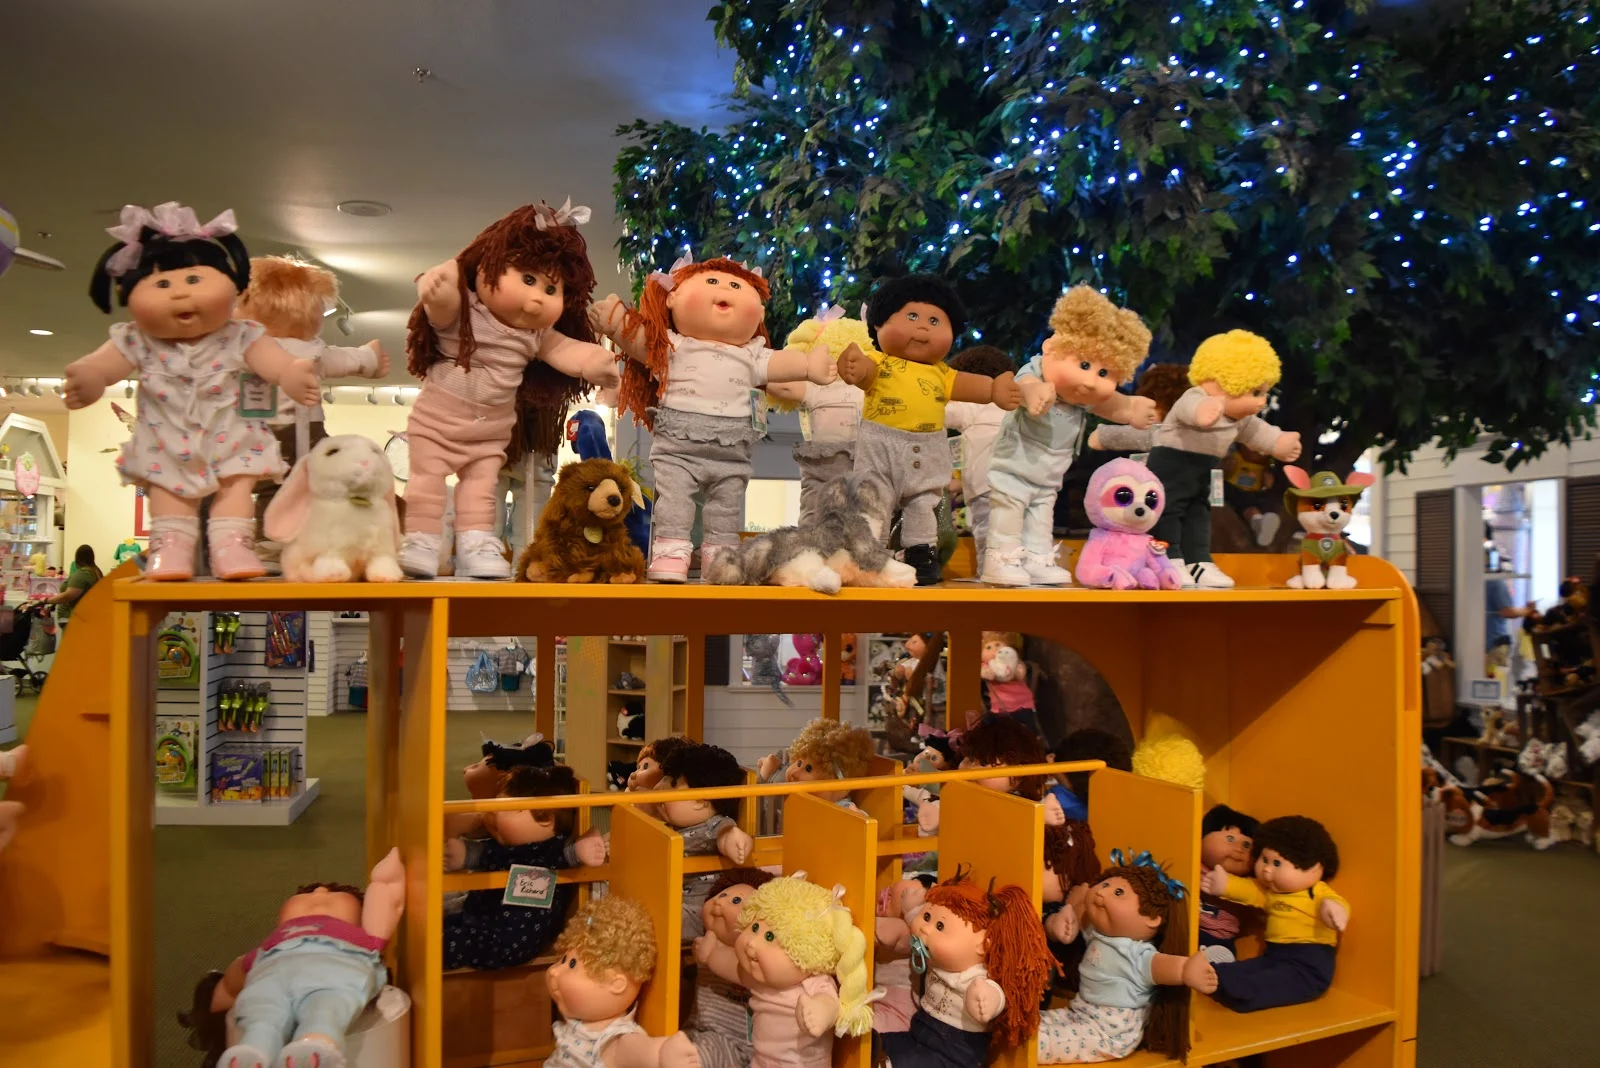 Our Trip to Babyland General Hospital: Birth Place of the Cabbage Patch Kid Dolls